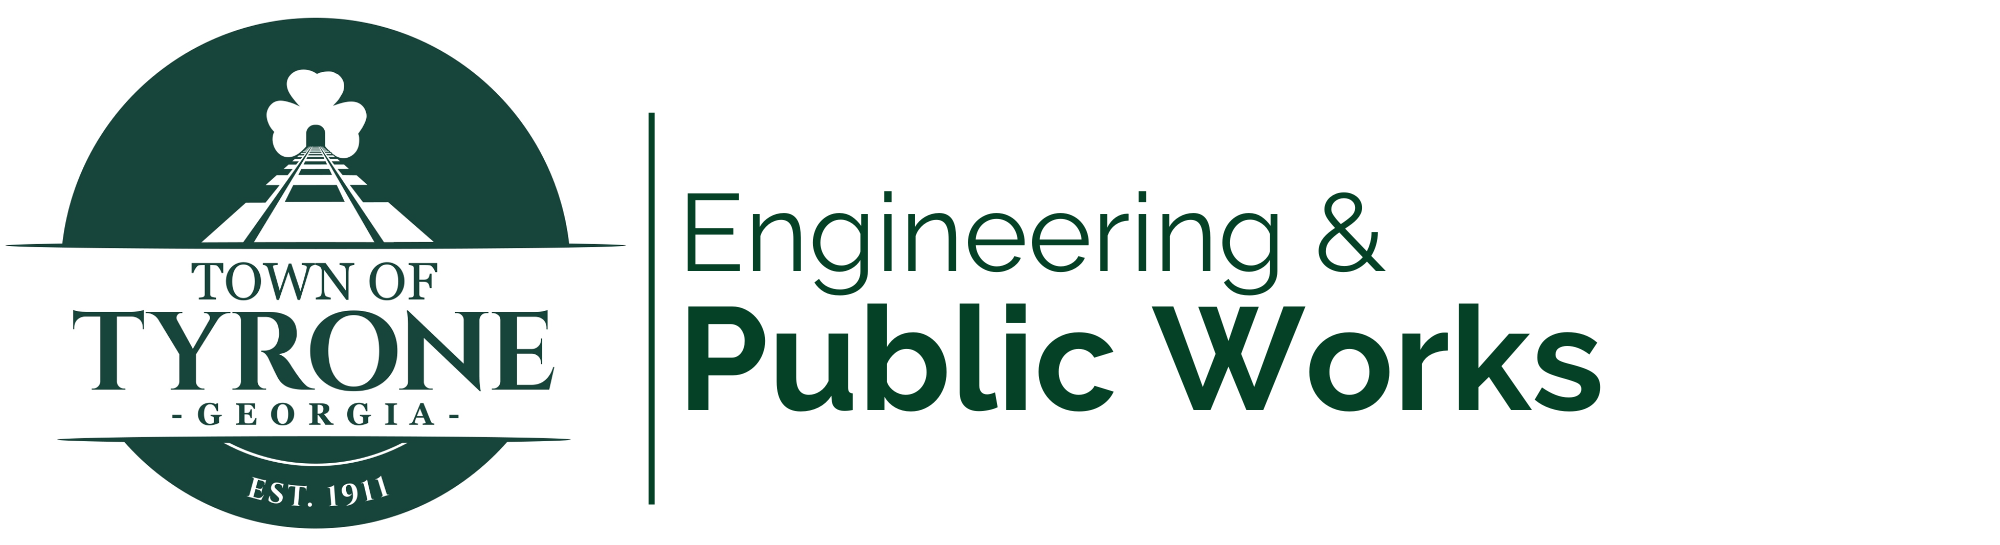 Engineering and Public Works logo